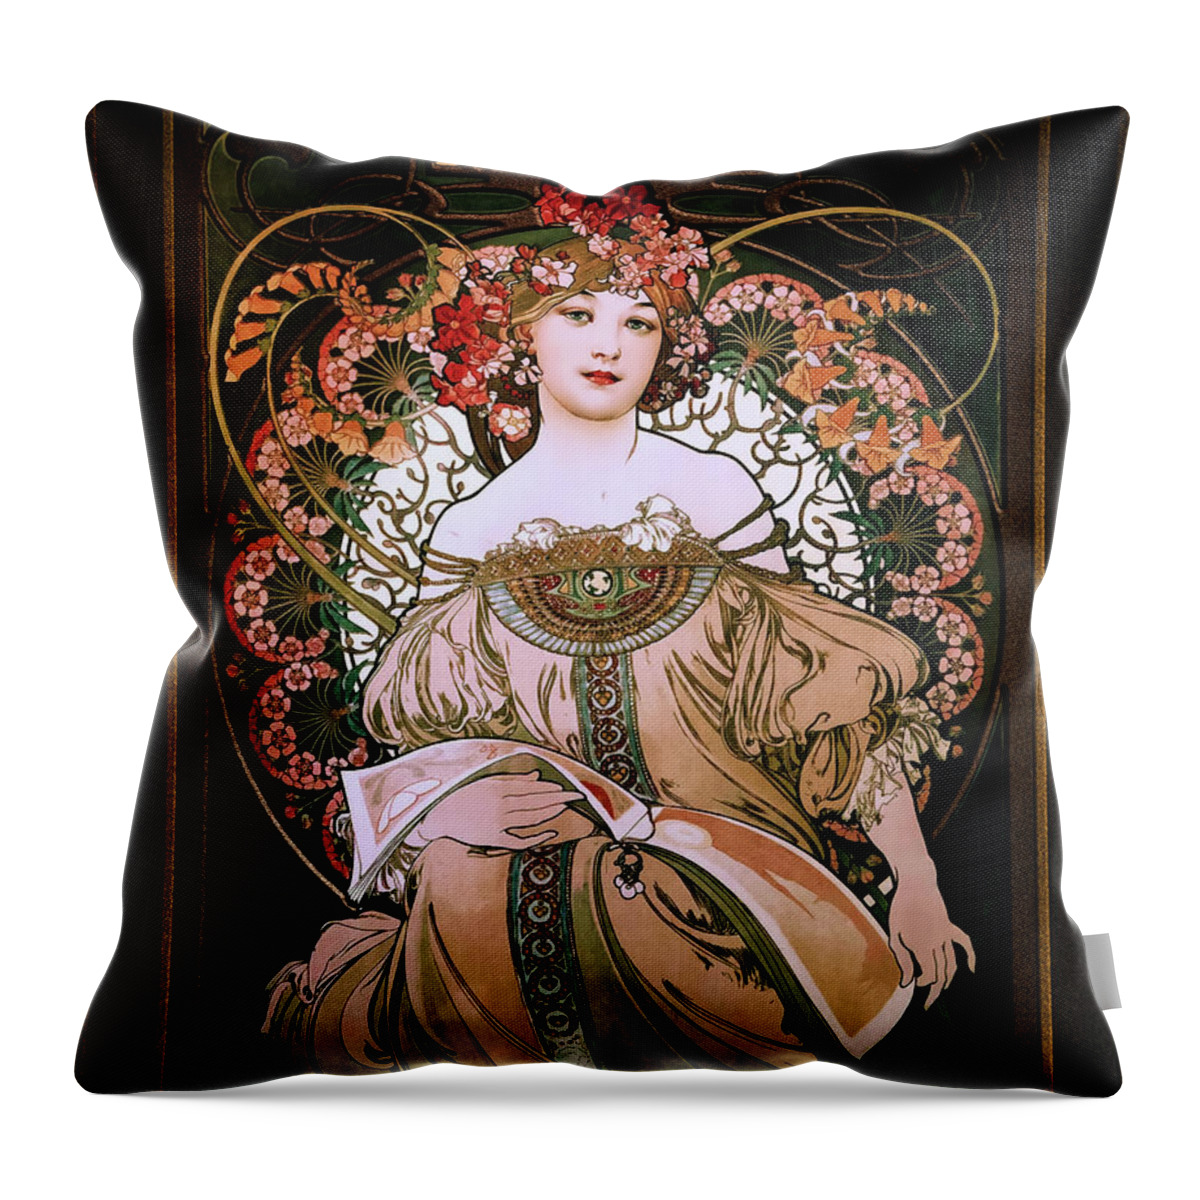 Daydream Throw Pillow featuring the painting Daydream c1896 by Alphonse Mucha Remastered Retro Art Xzendor7 Reproductions by Xzendor7